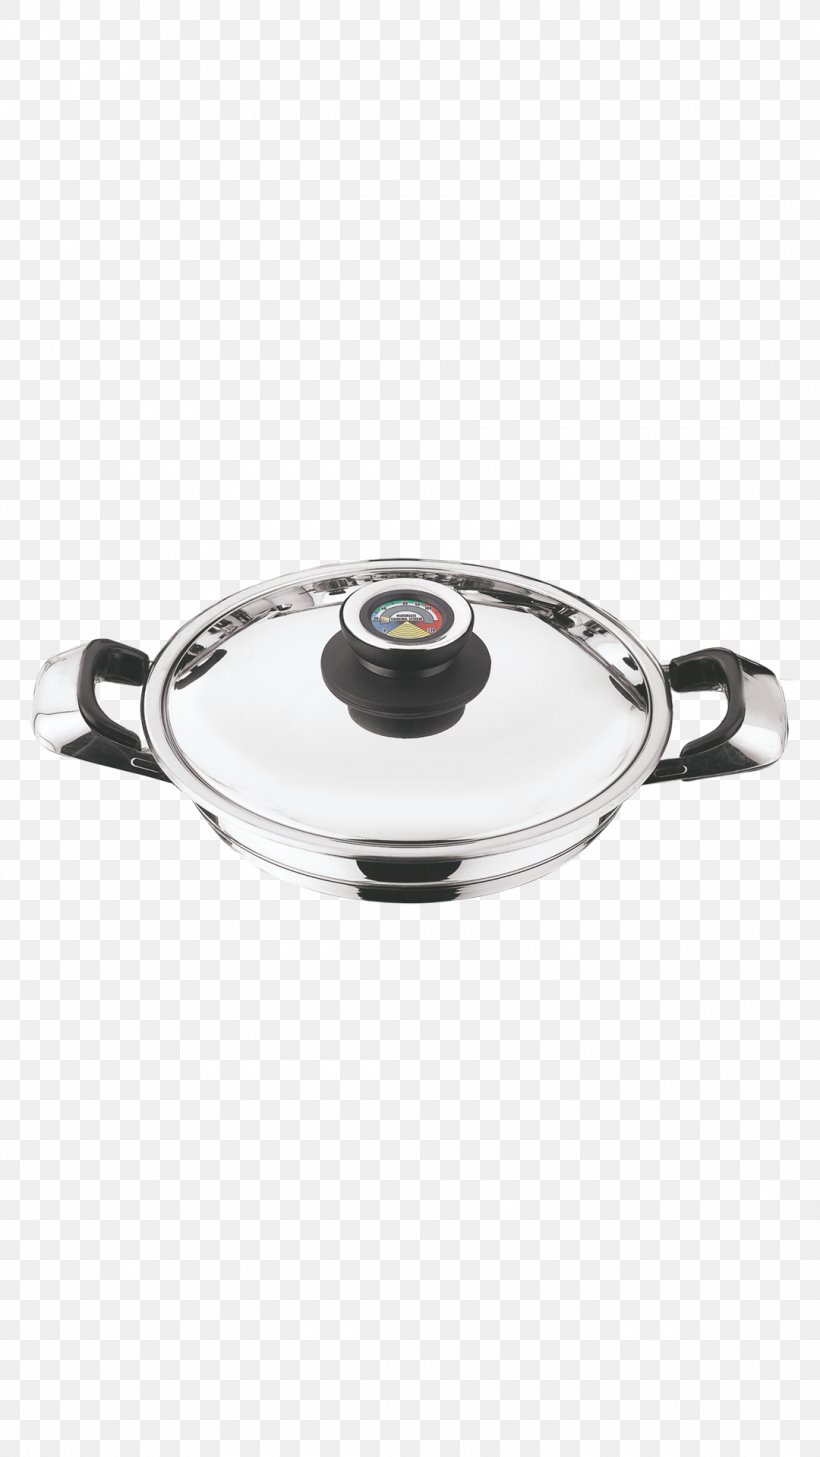 Frying Pan Tableware Cookware Cooking Lid, PNG, 1080x1920px, Frying Pan, Cooking, Cookware, Cookware Accessory, Cookware And Bakeware Download Free